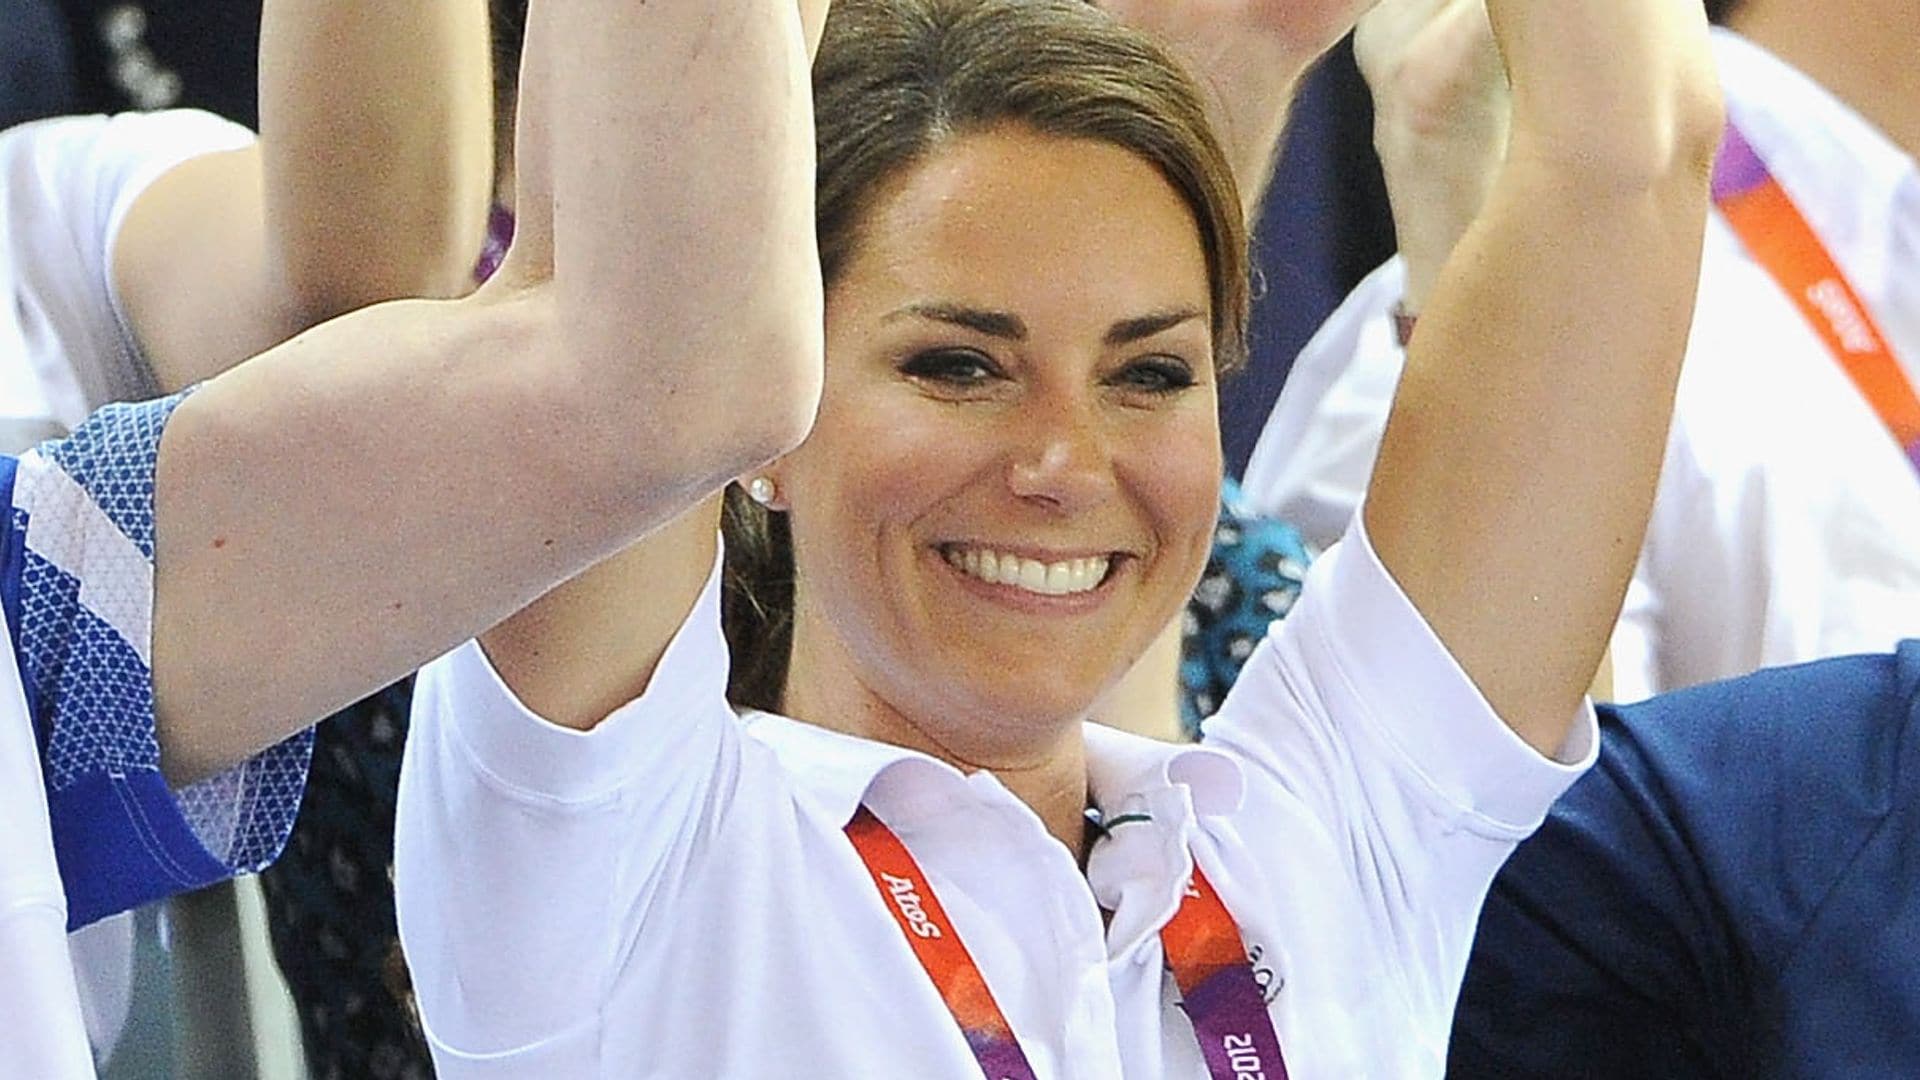 Will the Princess of Wales make an appearance at the Olympics?